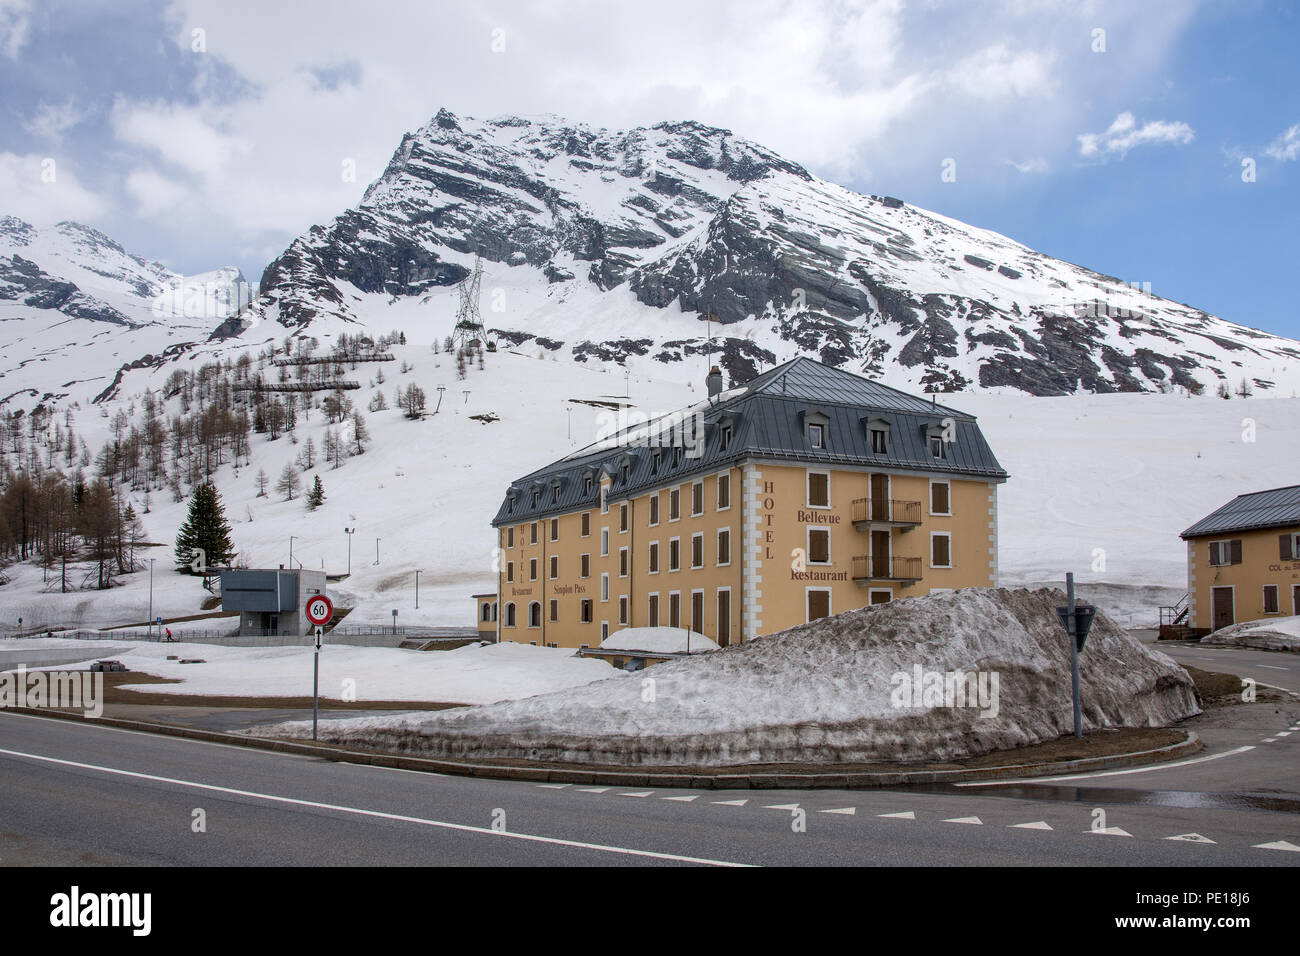 Bellevue Hotel and Restaurant at side of E62 Simplonstrasse road on northern side of Simplon Pass in Switzerland with snow banks at side of road and s Stock Photo